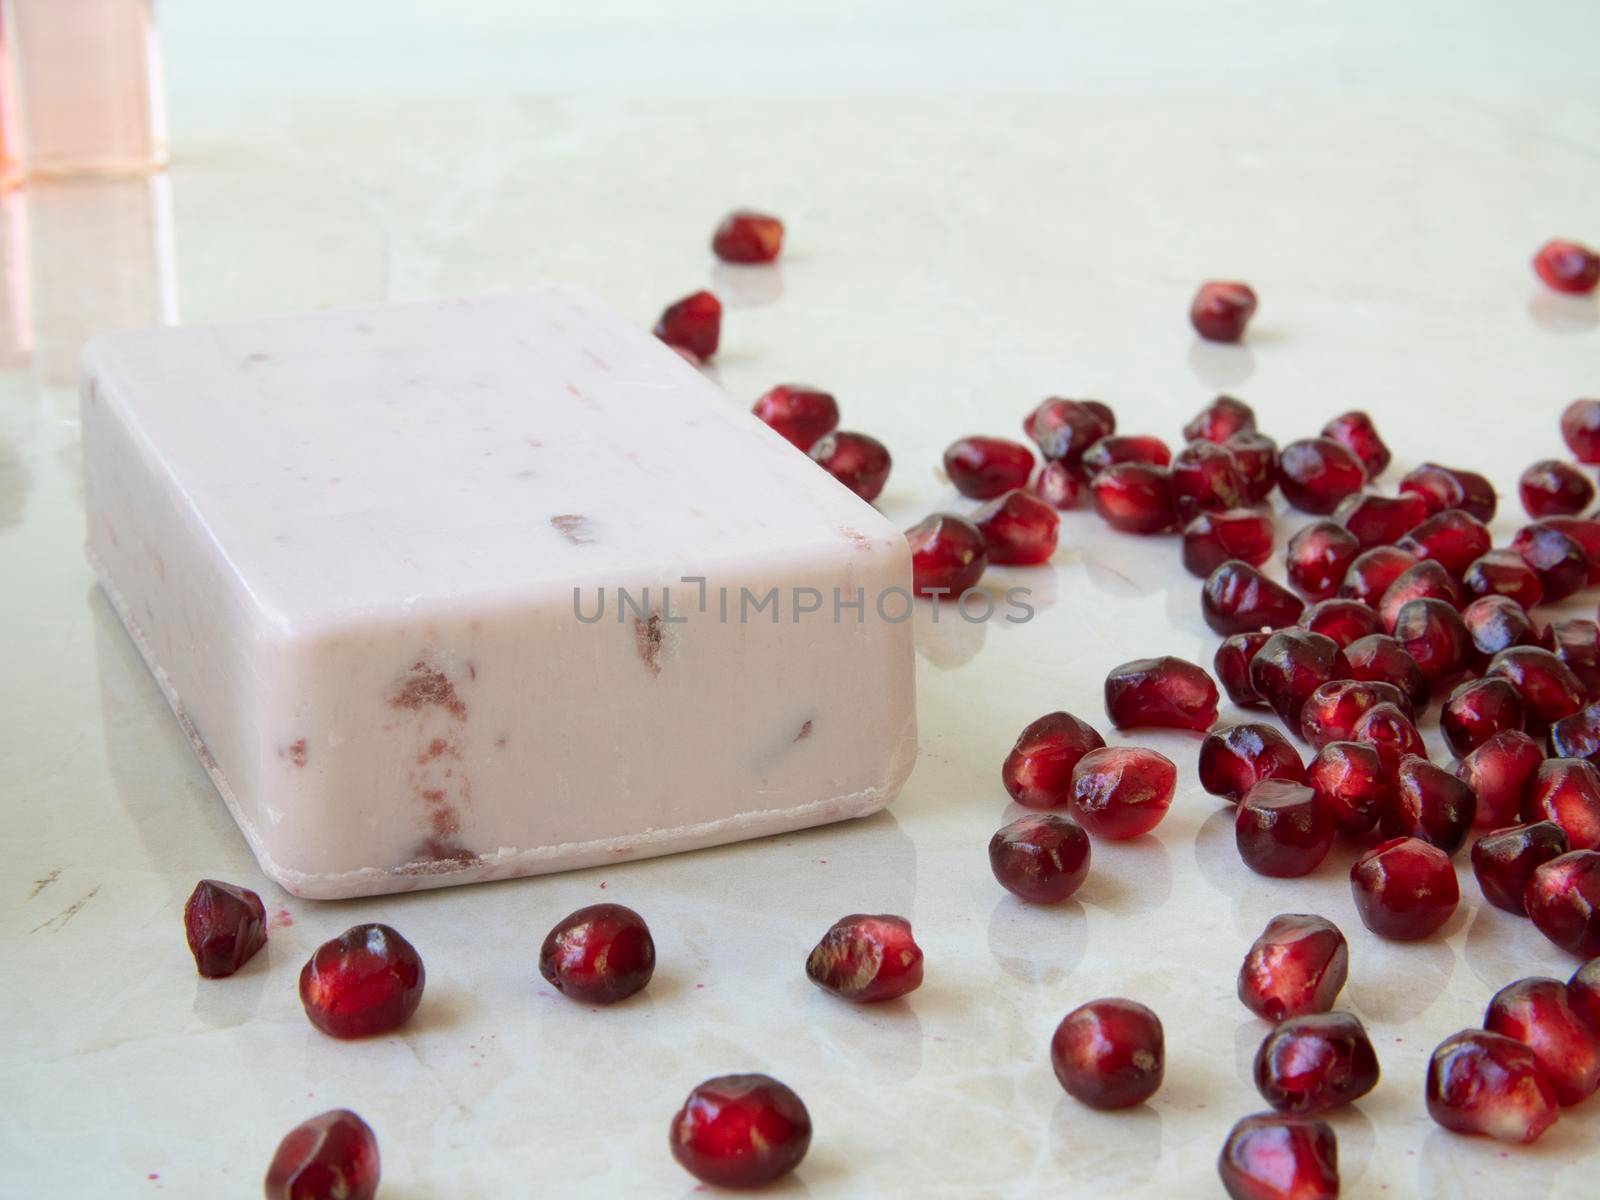 Pomegranate seeds and refreshing pomegranate soap